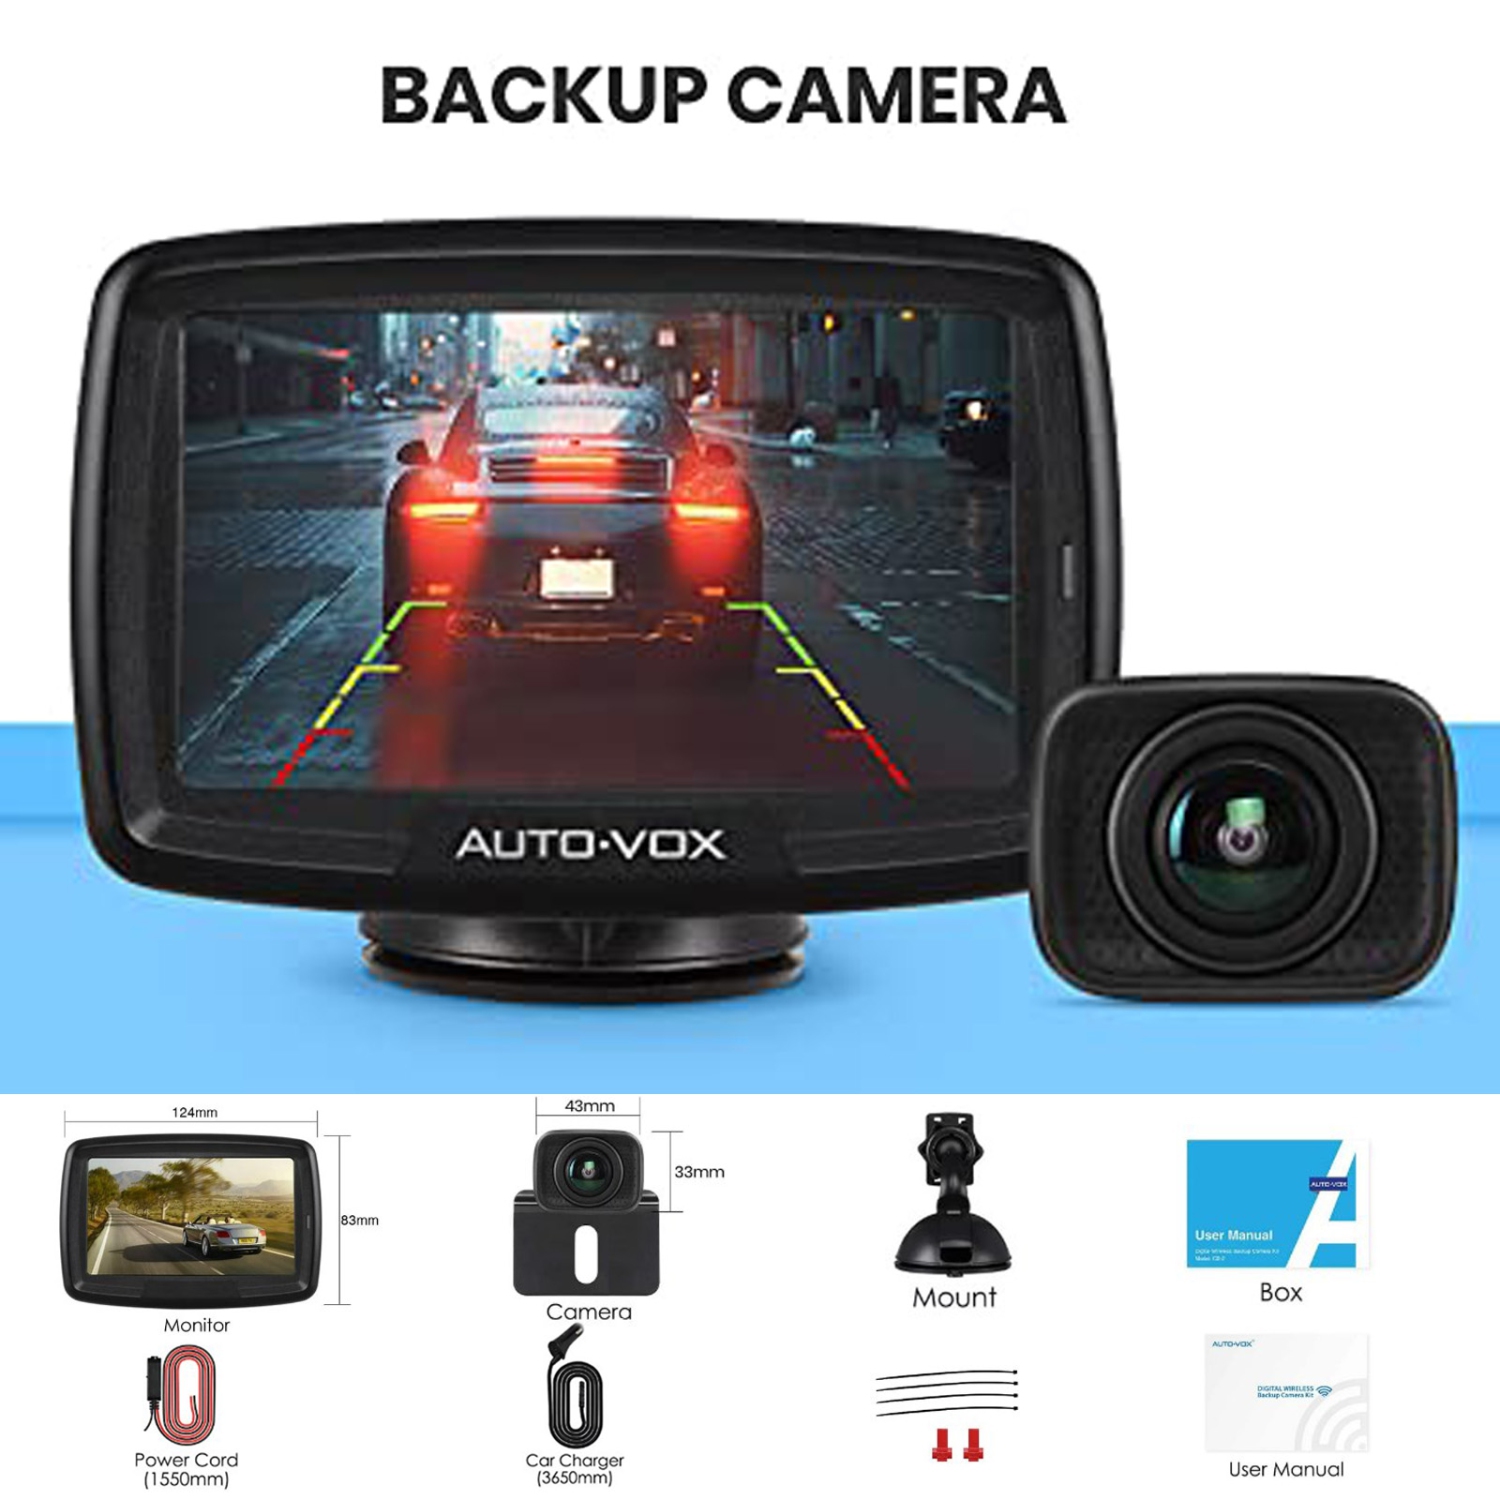 Auto-Vox Digital Wireless Backup Camera System for Truck, 4.3" Monitor Trailers Reverse Camera Rear View Camera for Van, Camping Car, SUV（CS-2 ）